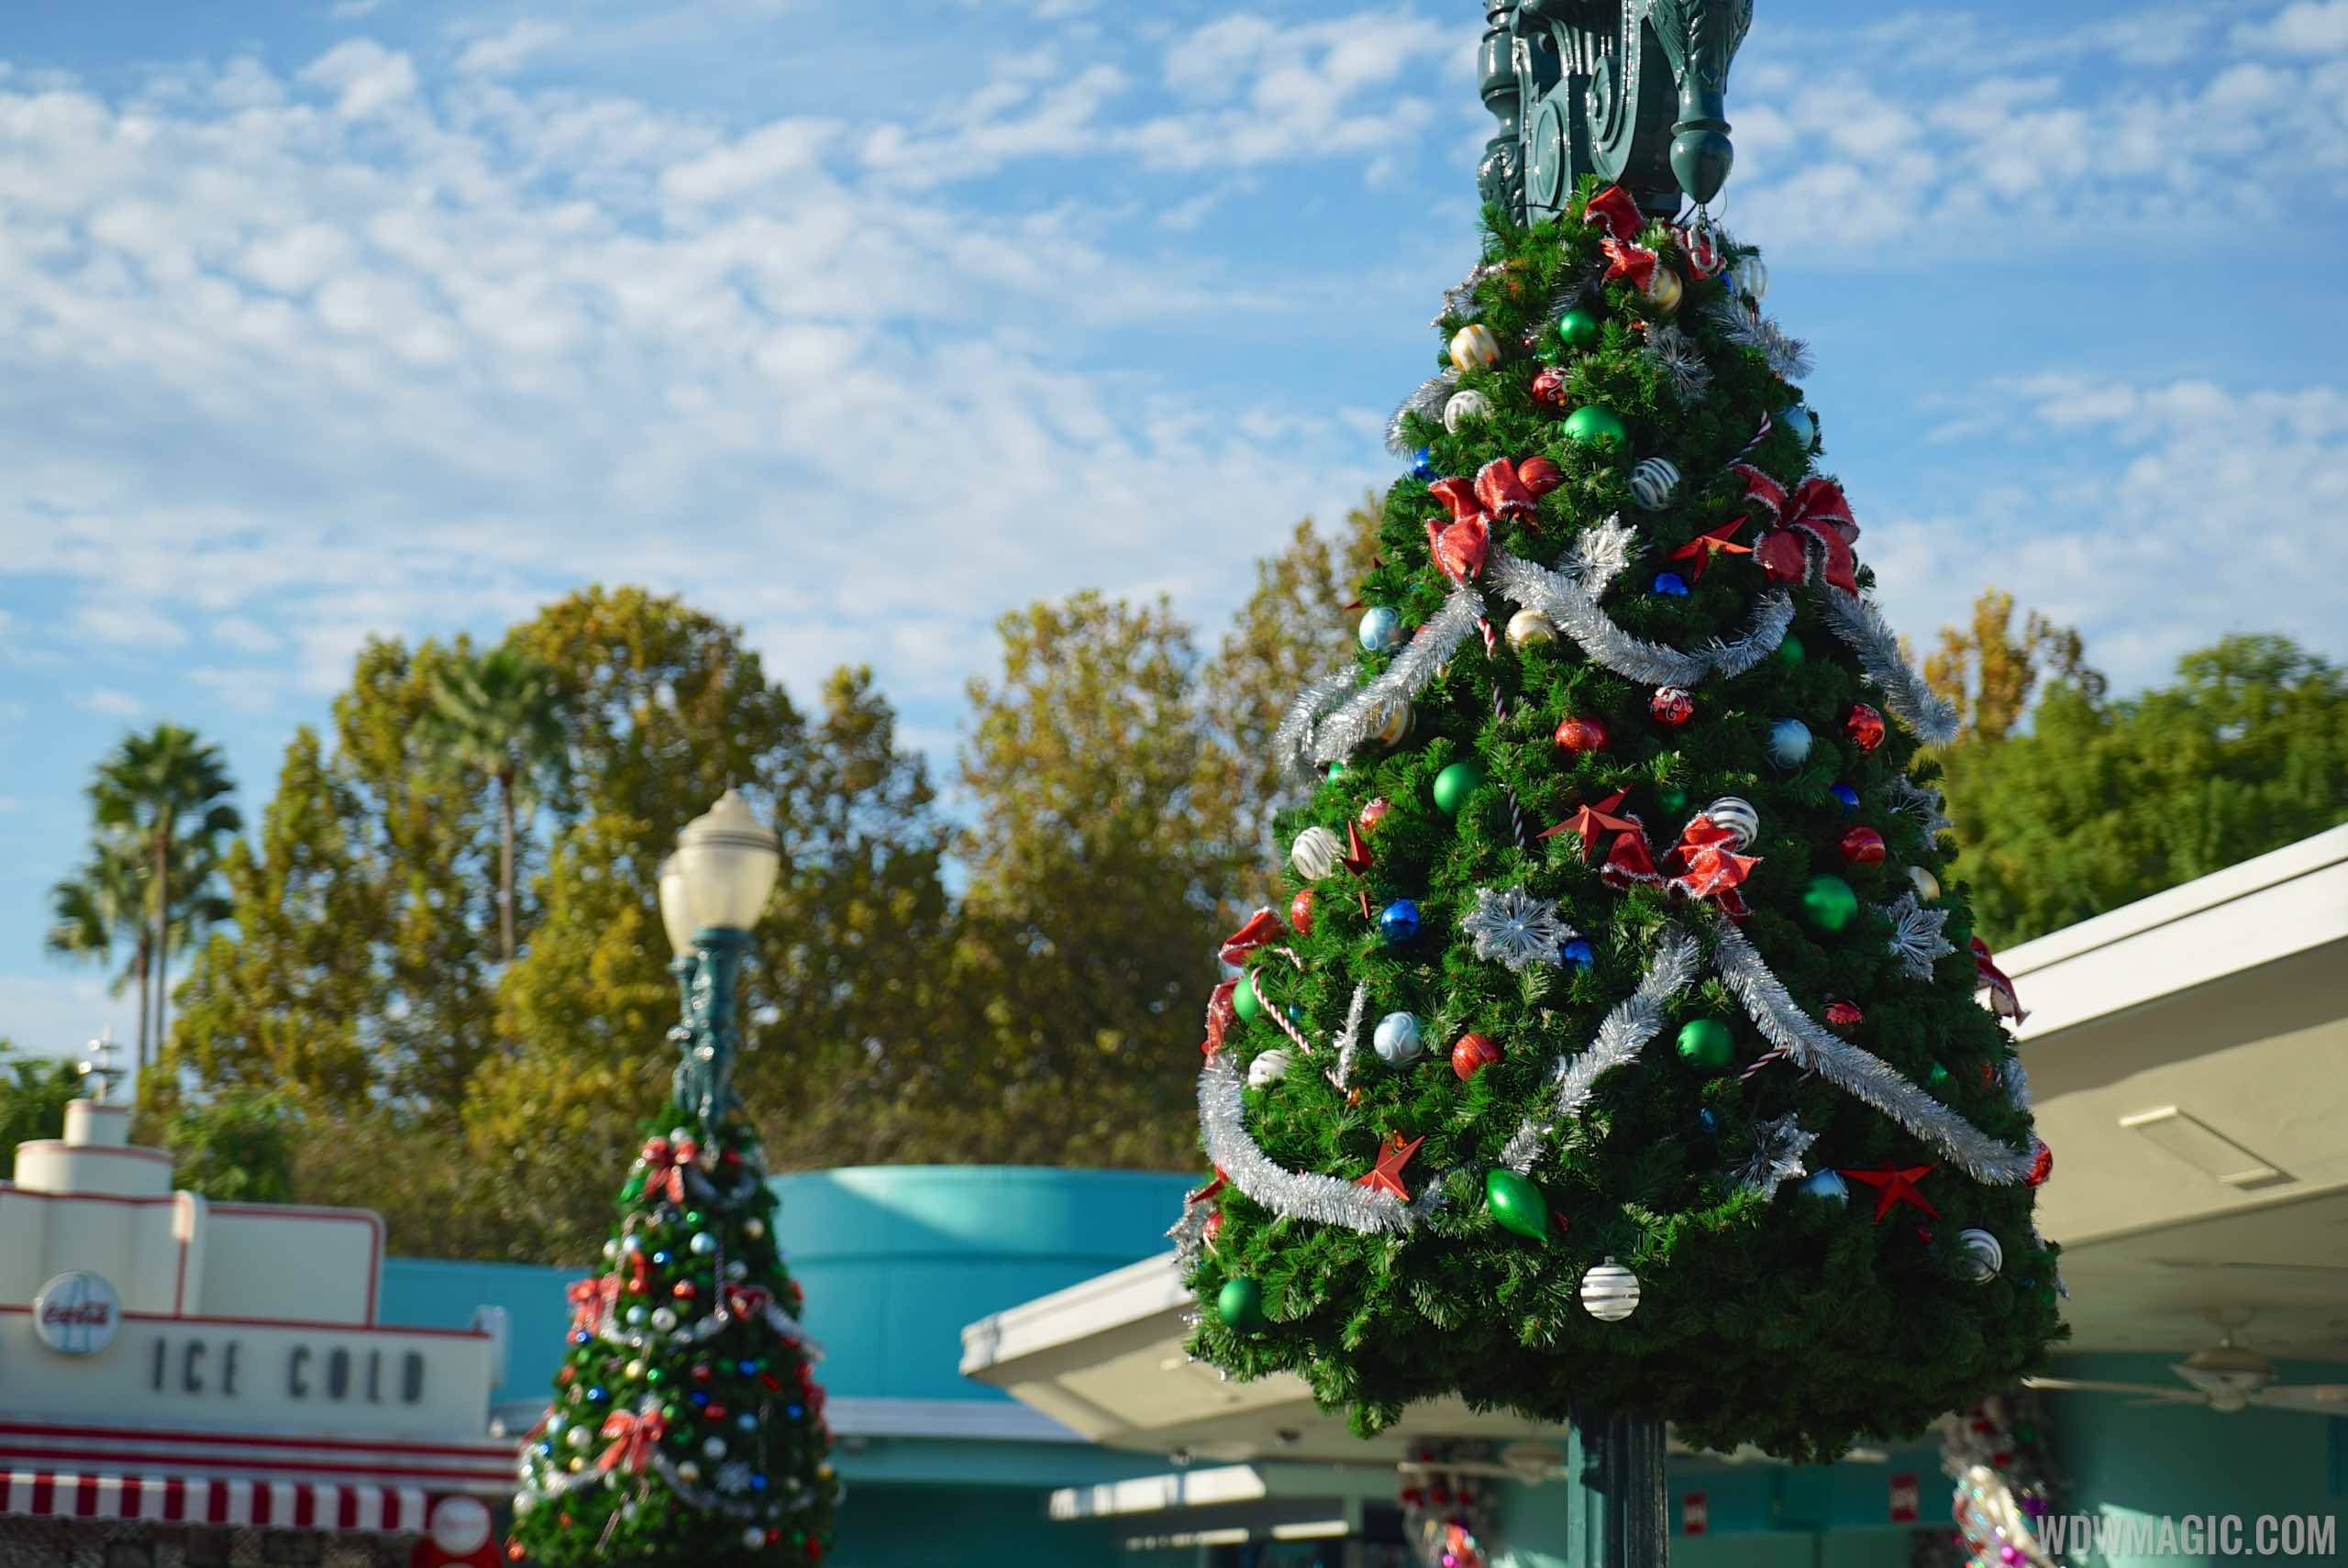 PHOTOS - Holiday decorations now up at Disney's Hollywood Studios